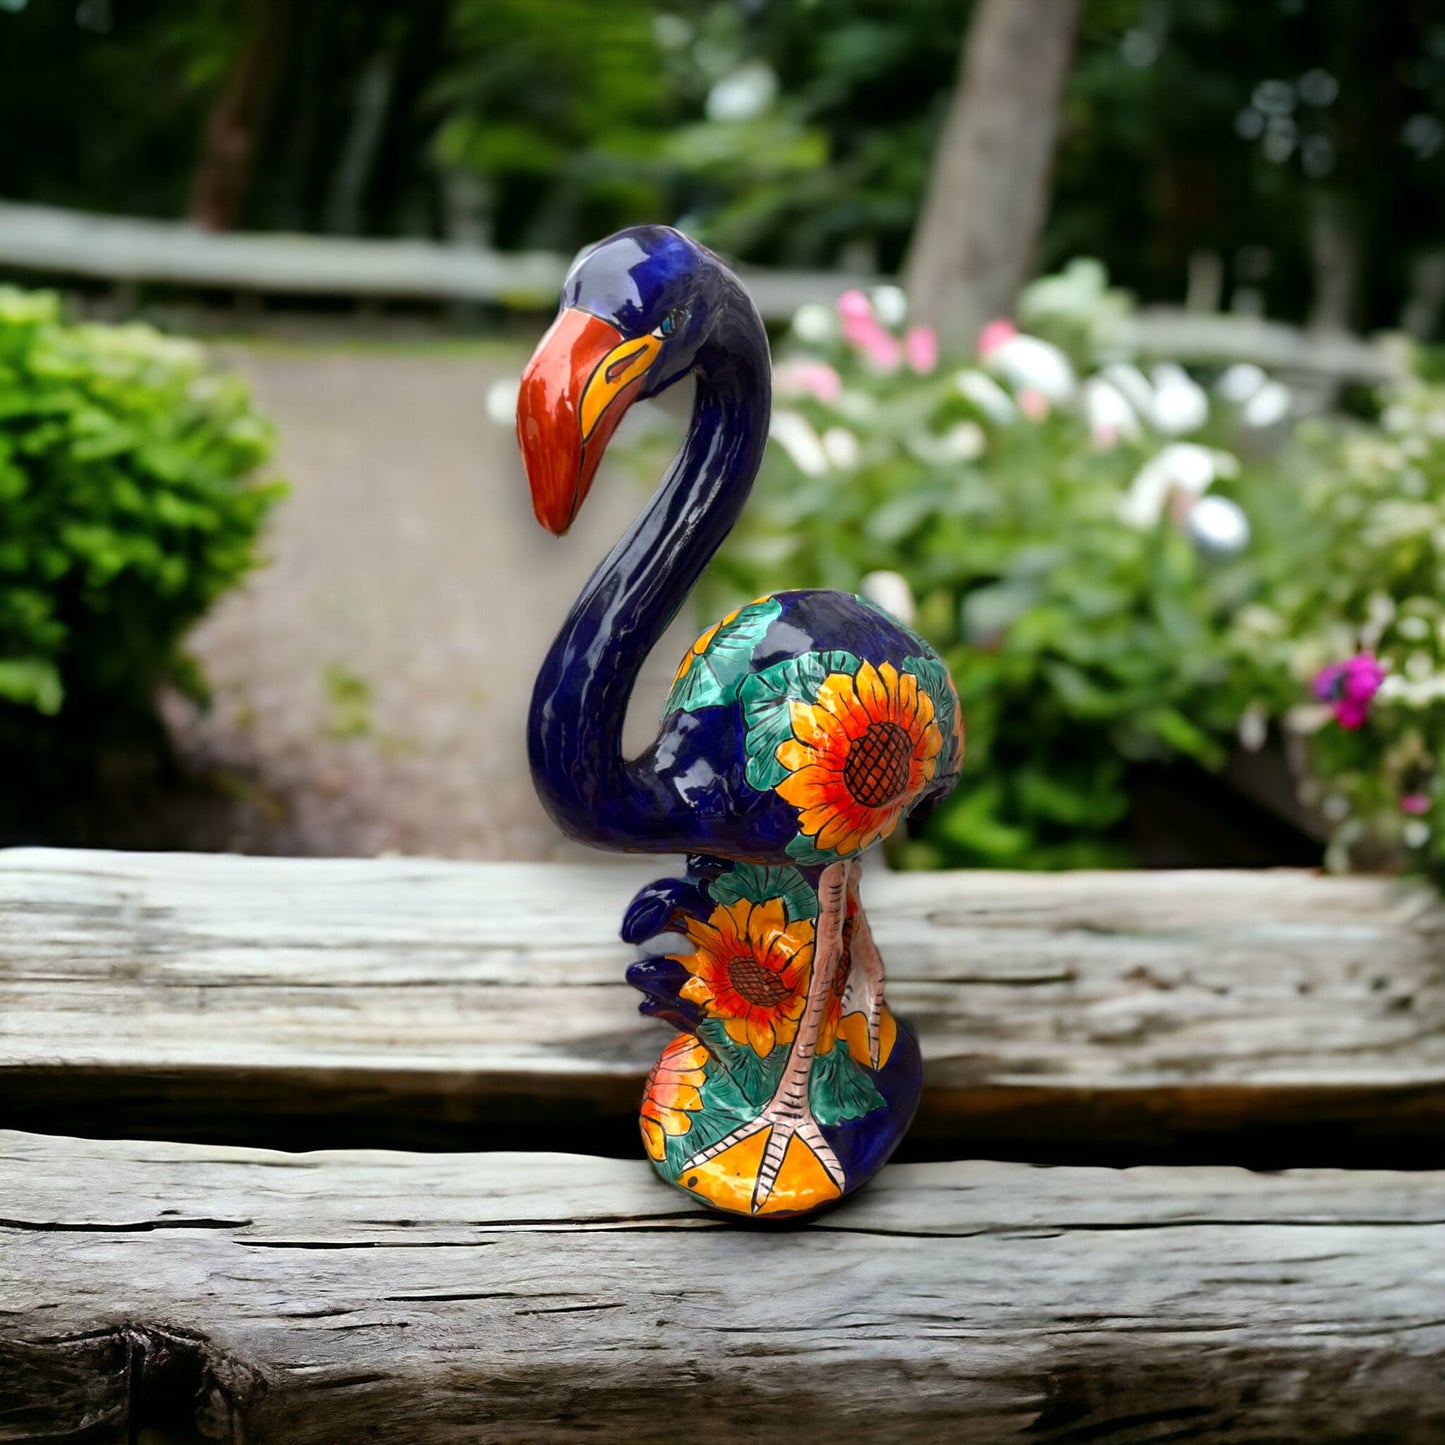 Large Talavera Flamingo Statue | Colorful Hand-Painted Mexican Bird Pottery (2.5 Feet Tall)